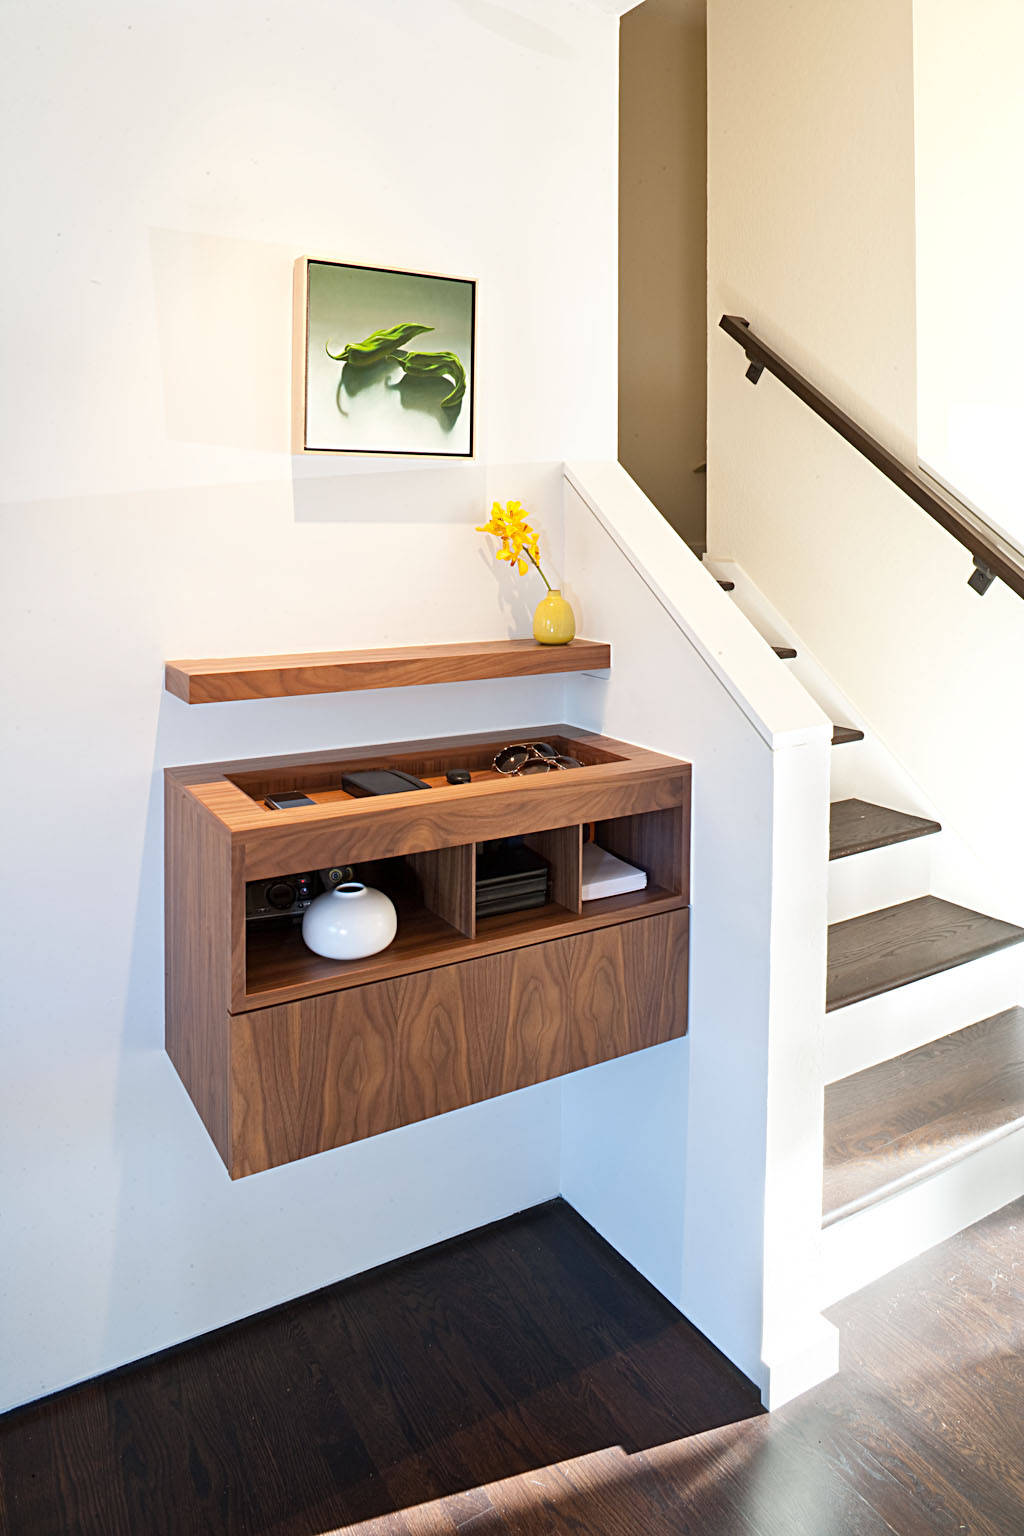 https://st.hzcdn.com/simgs/pictures/entryways/moraga-residence-jennifer-weiss-architecture-img~fb61f44d0c23f86a_14-4724-1-3f40561.jpg